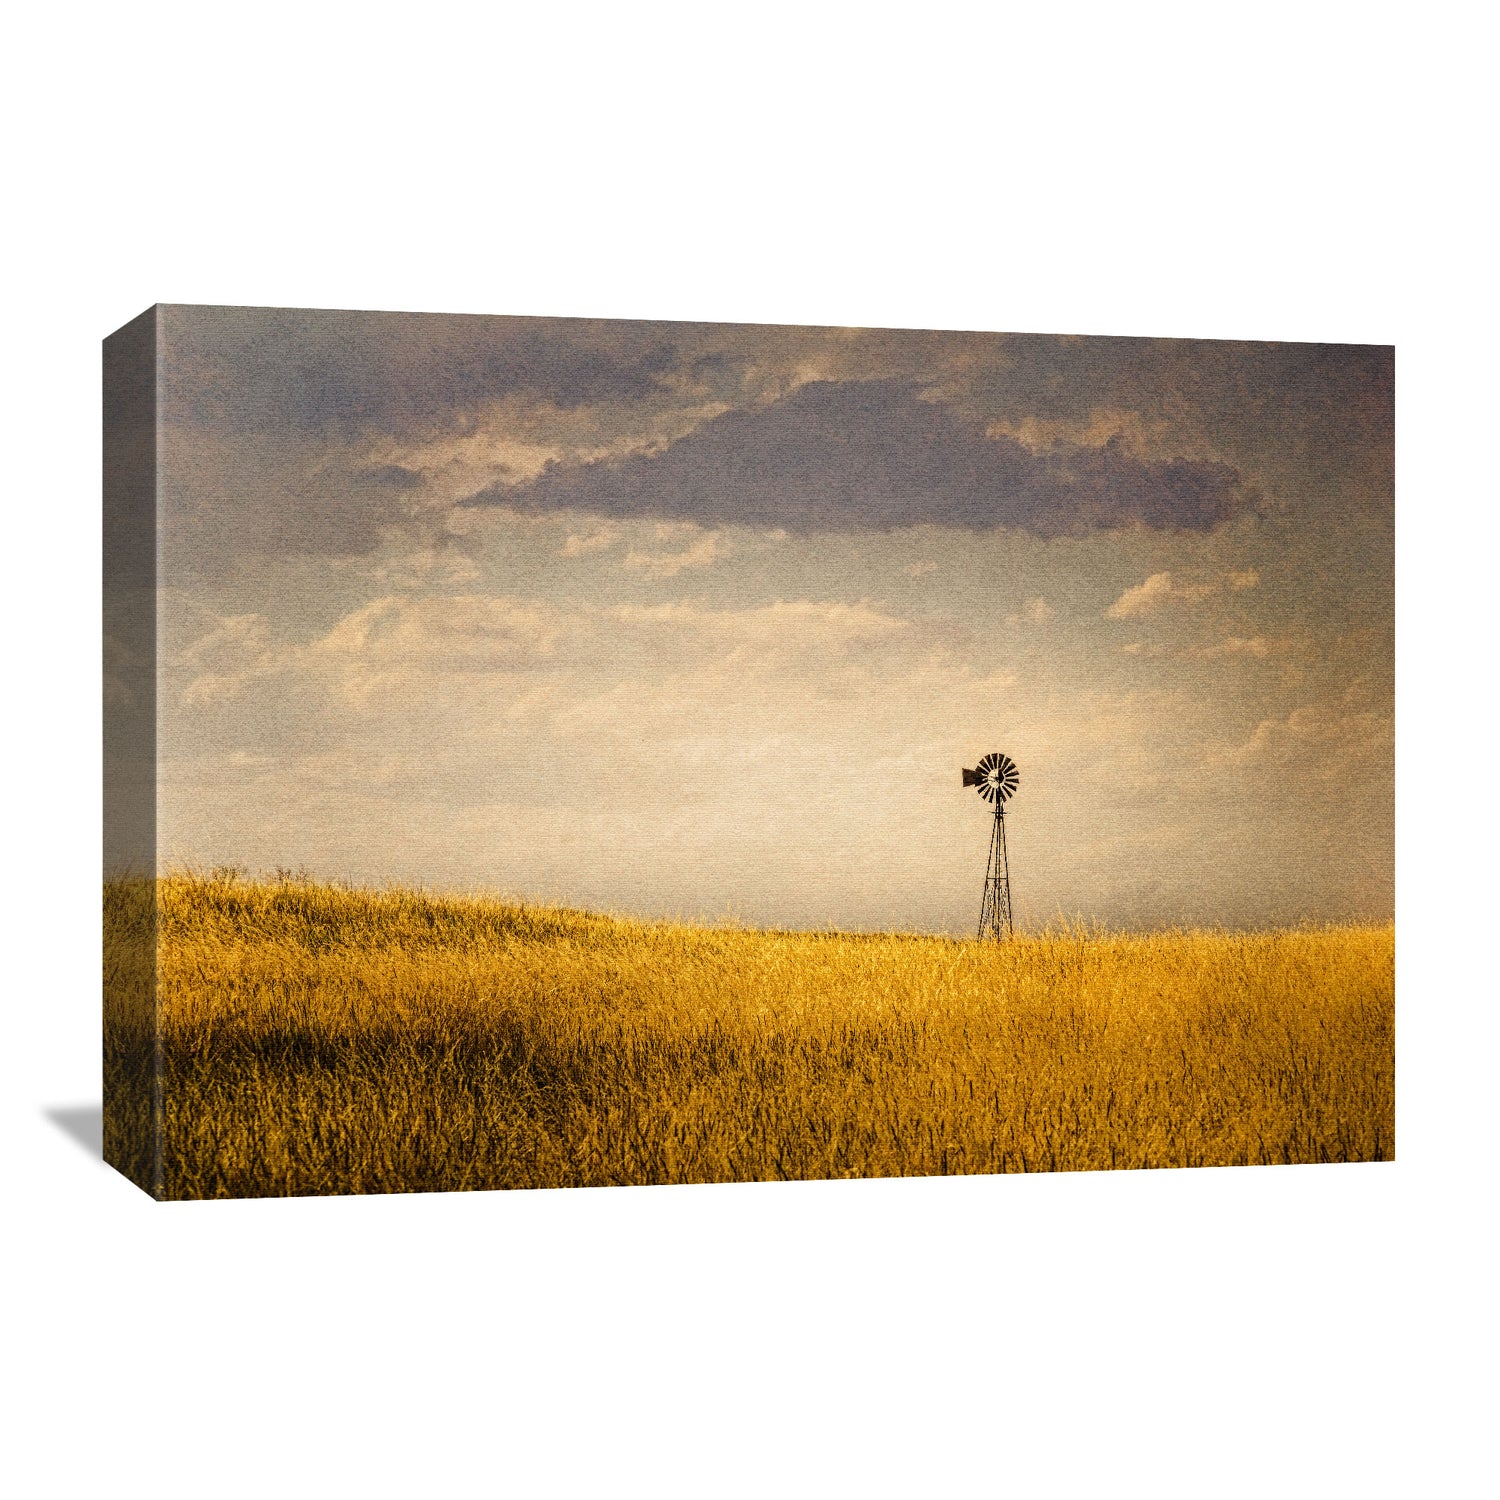 Echoing the spirit of the West, this canvas wall art captures the enduring beauty of a Nebraska windmill, a serene addition to any room looking for a touch of Americana.